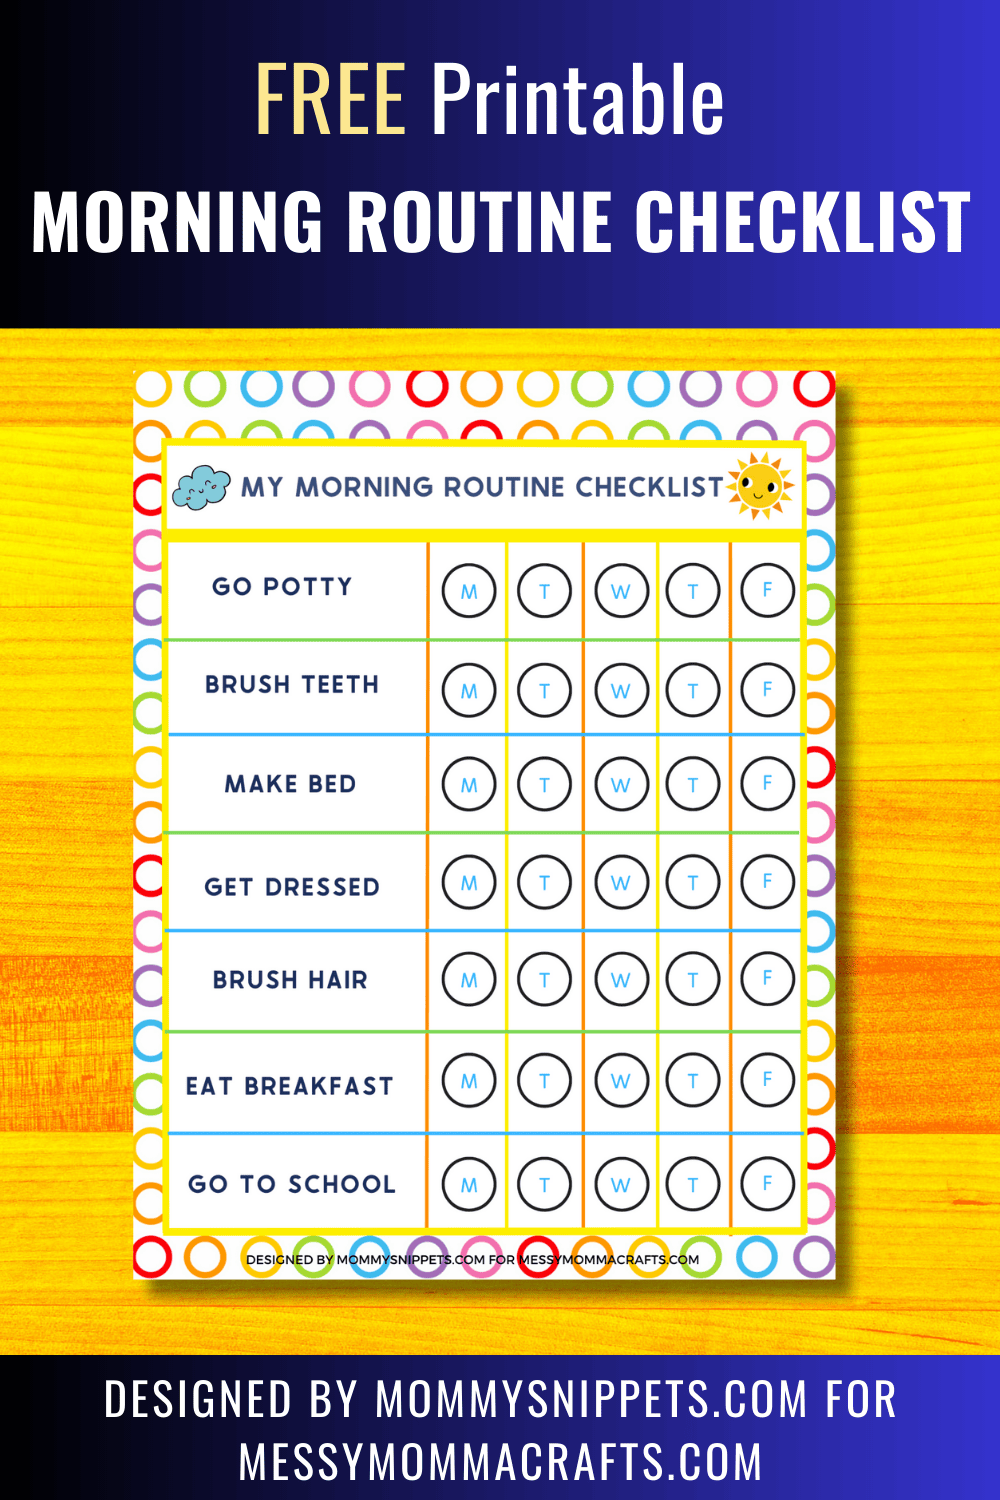 Morning Routine Checklist DESIGNED BY MOMMYSNIPPETS.COM FOR messymommacrafts.com